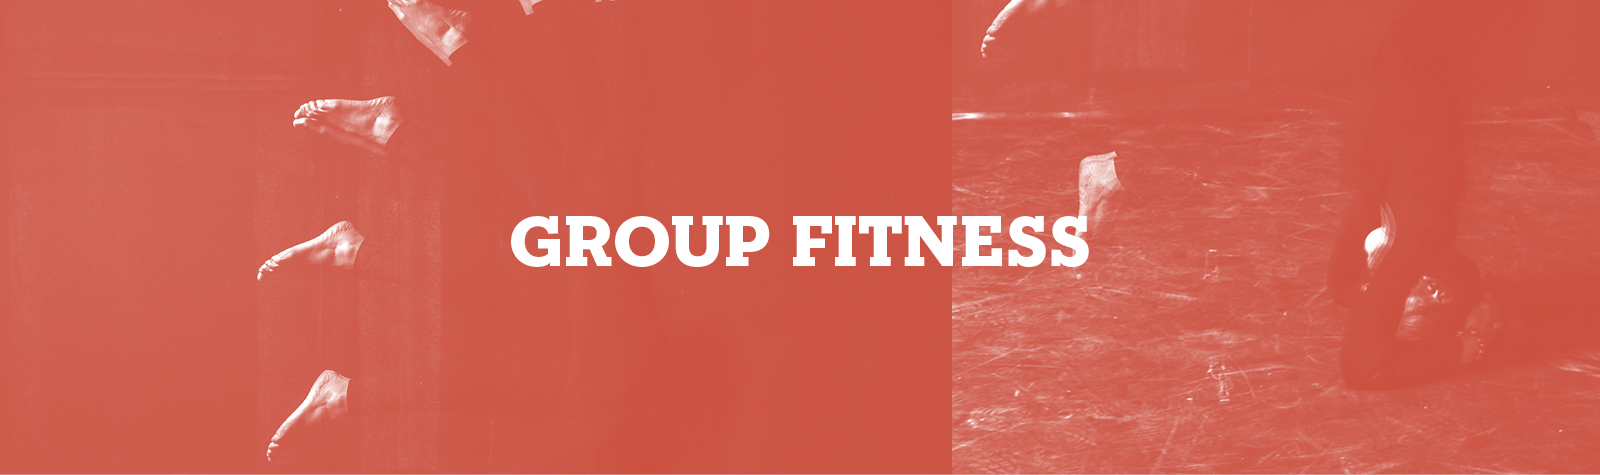 28th IHFC by Grafts Hellas - Group Fitness Conference banner